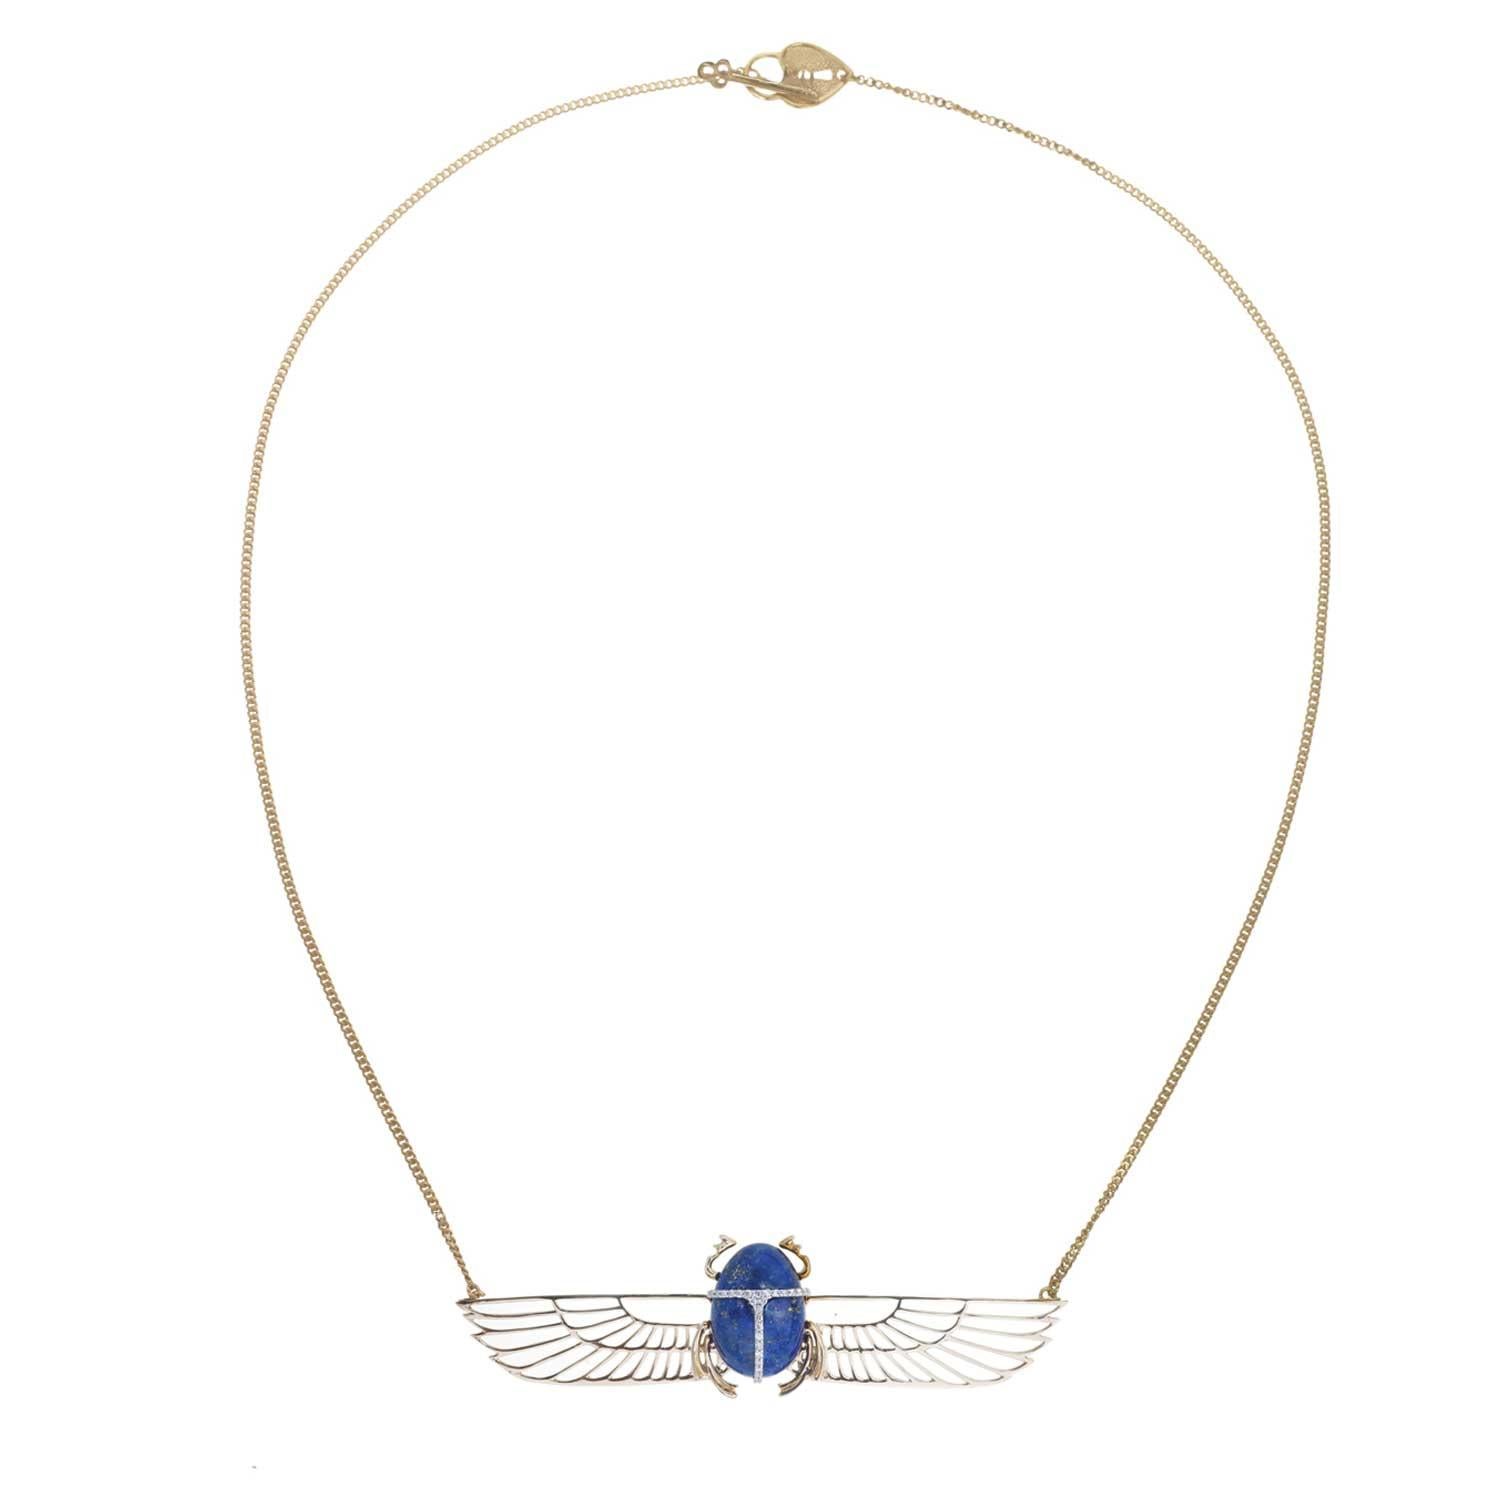 In Egyptian mythology, the scarab beetle symbolises rebirth, renewal and protection whilst Khephera - the god of sunrise - is always connected to the cycle of life.
With Lapis lazuli and diamonds, let this beautiful piece be a constant reminder of